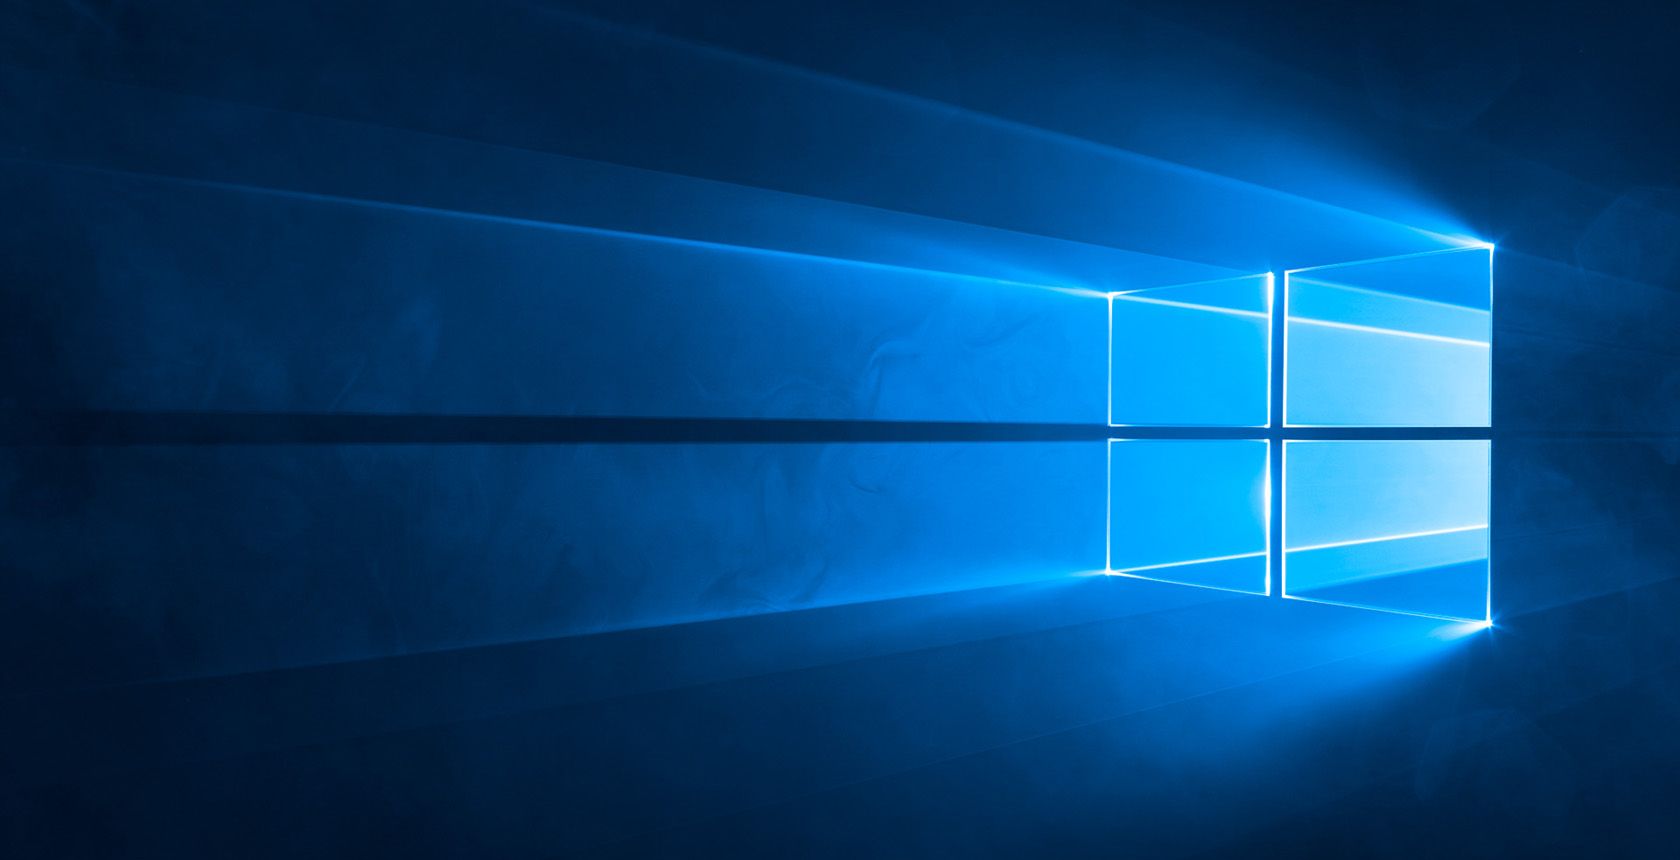 Where Does Windows 10 Stores Its Default Wallpaper and Lock Screens?